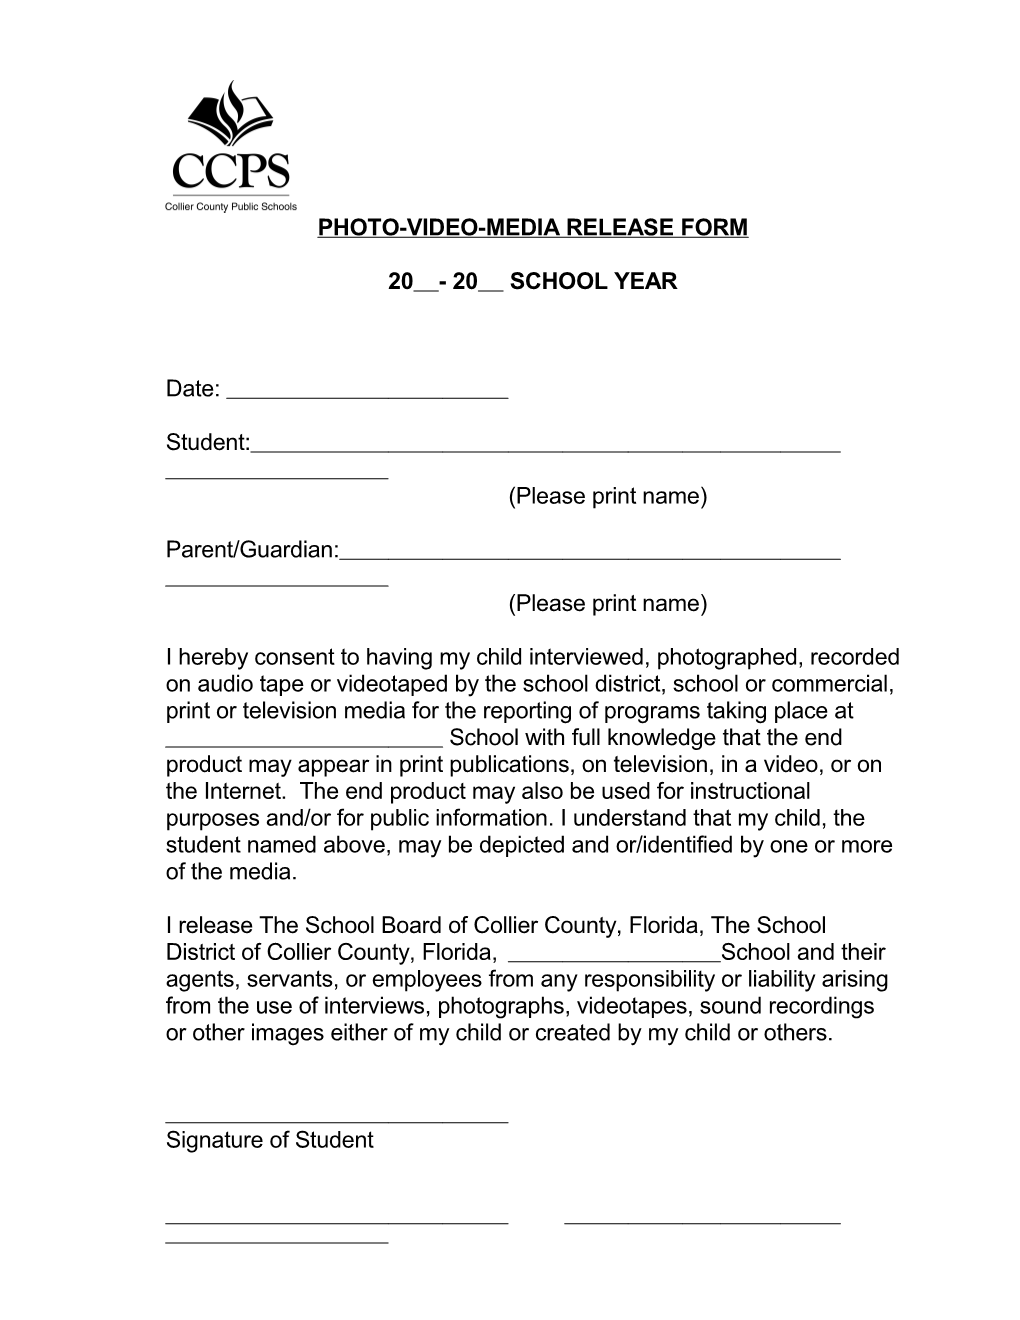 Photo-Video-Media Release Form